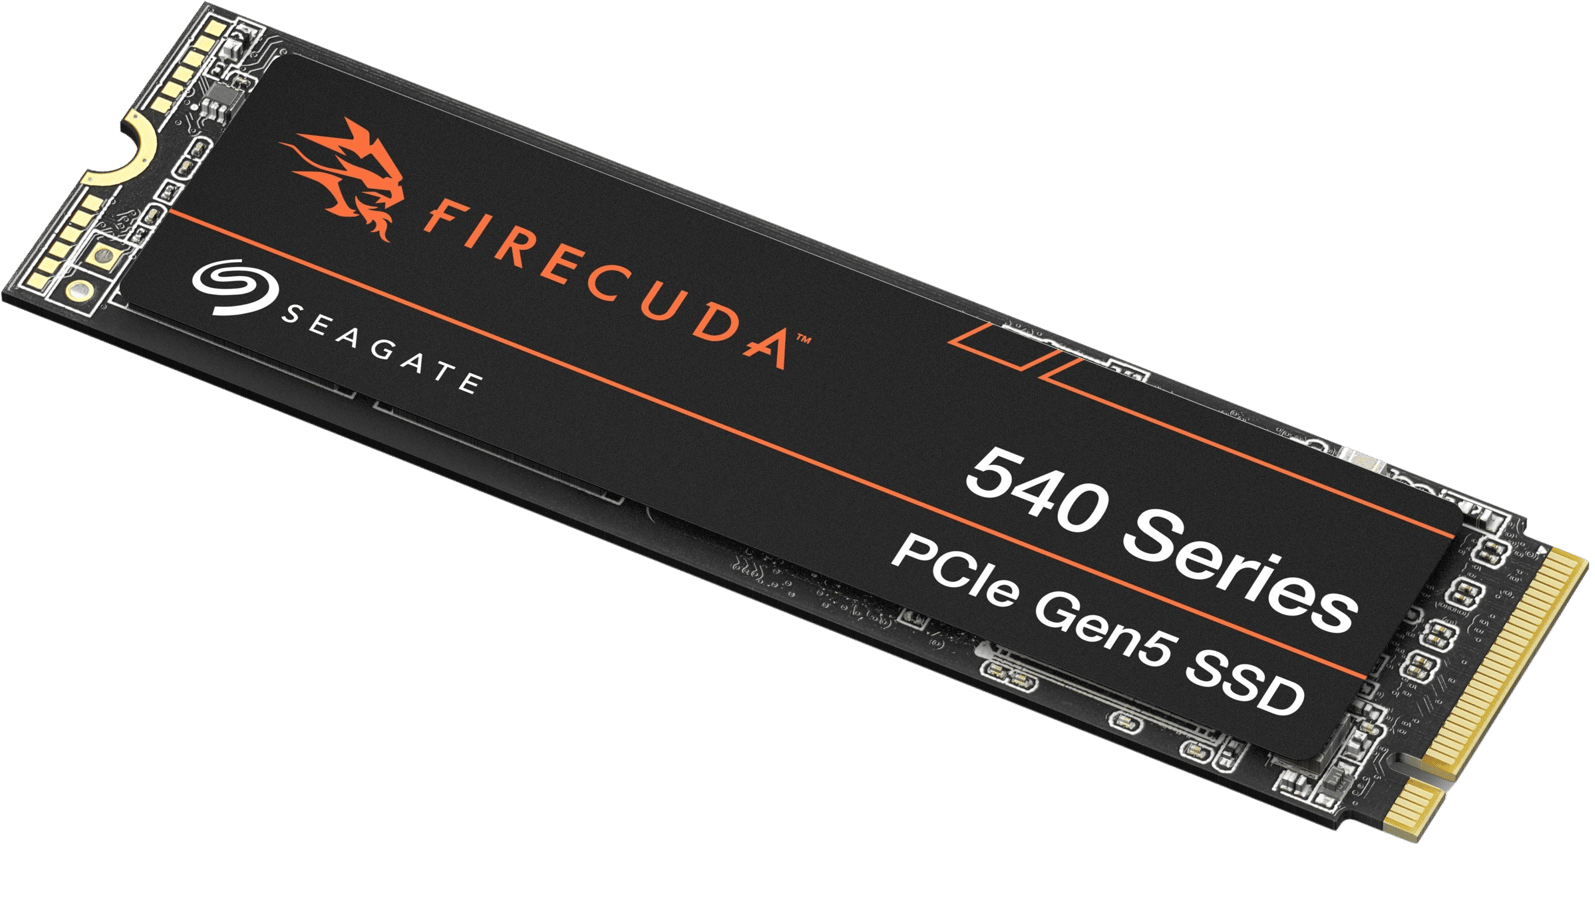 Seagate - Ssd Externe Gaming - Firecuda - 2to - Usb-c Nvme